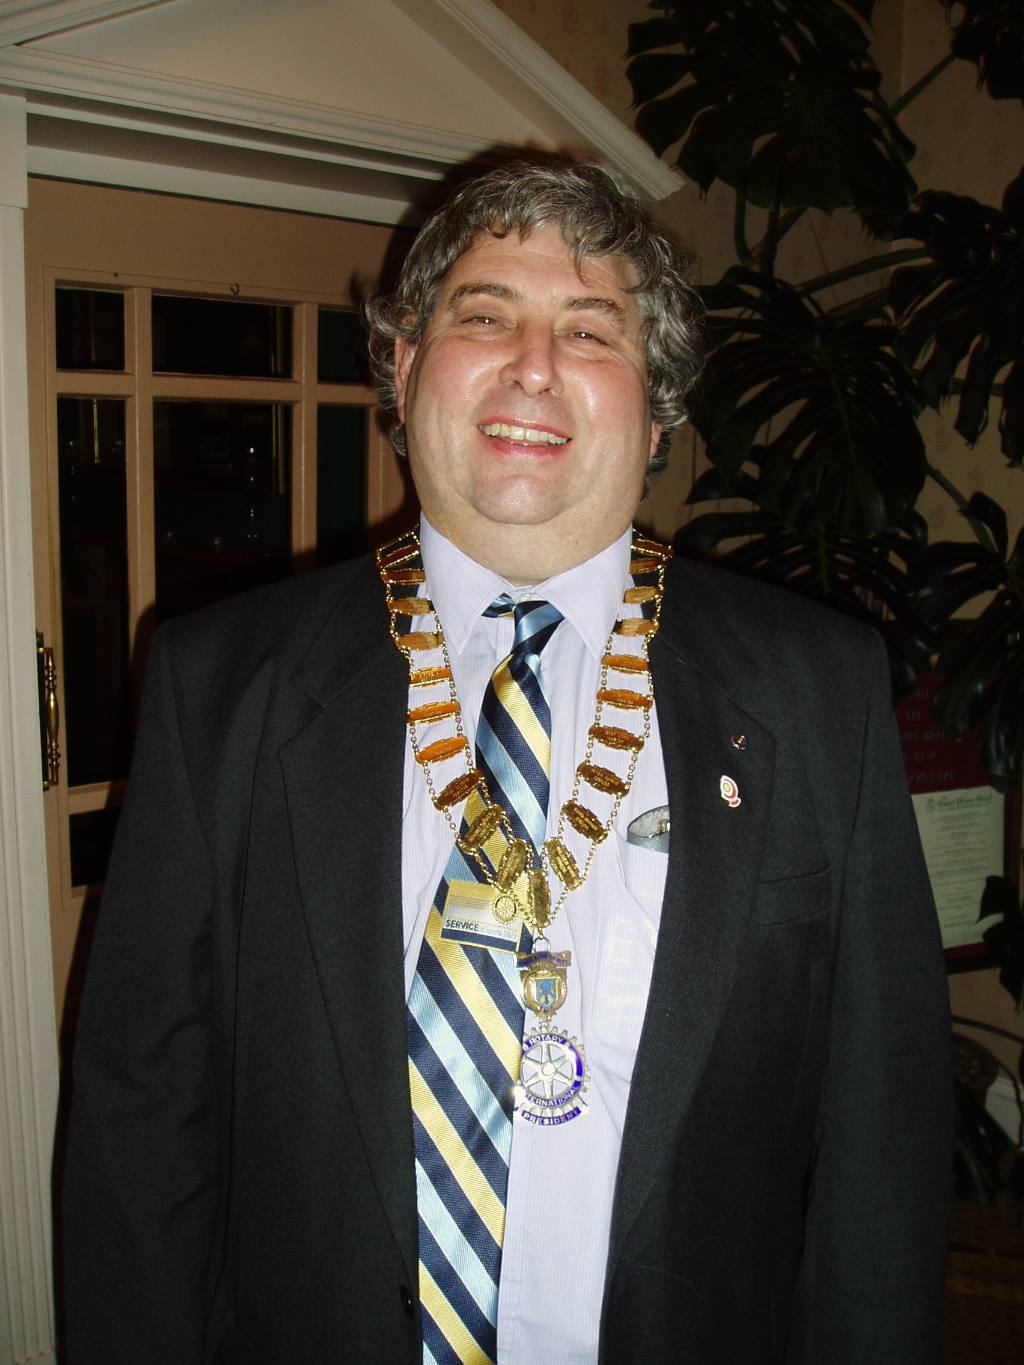 Club Officers 2006-2007 - Immediate Past President and Membership Committee Chairman Chris Sykes